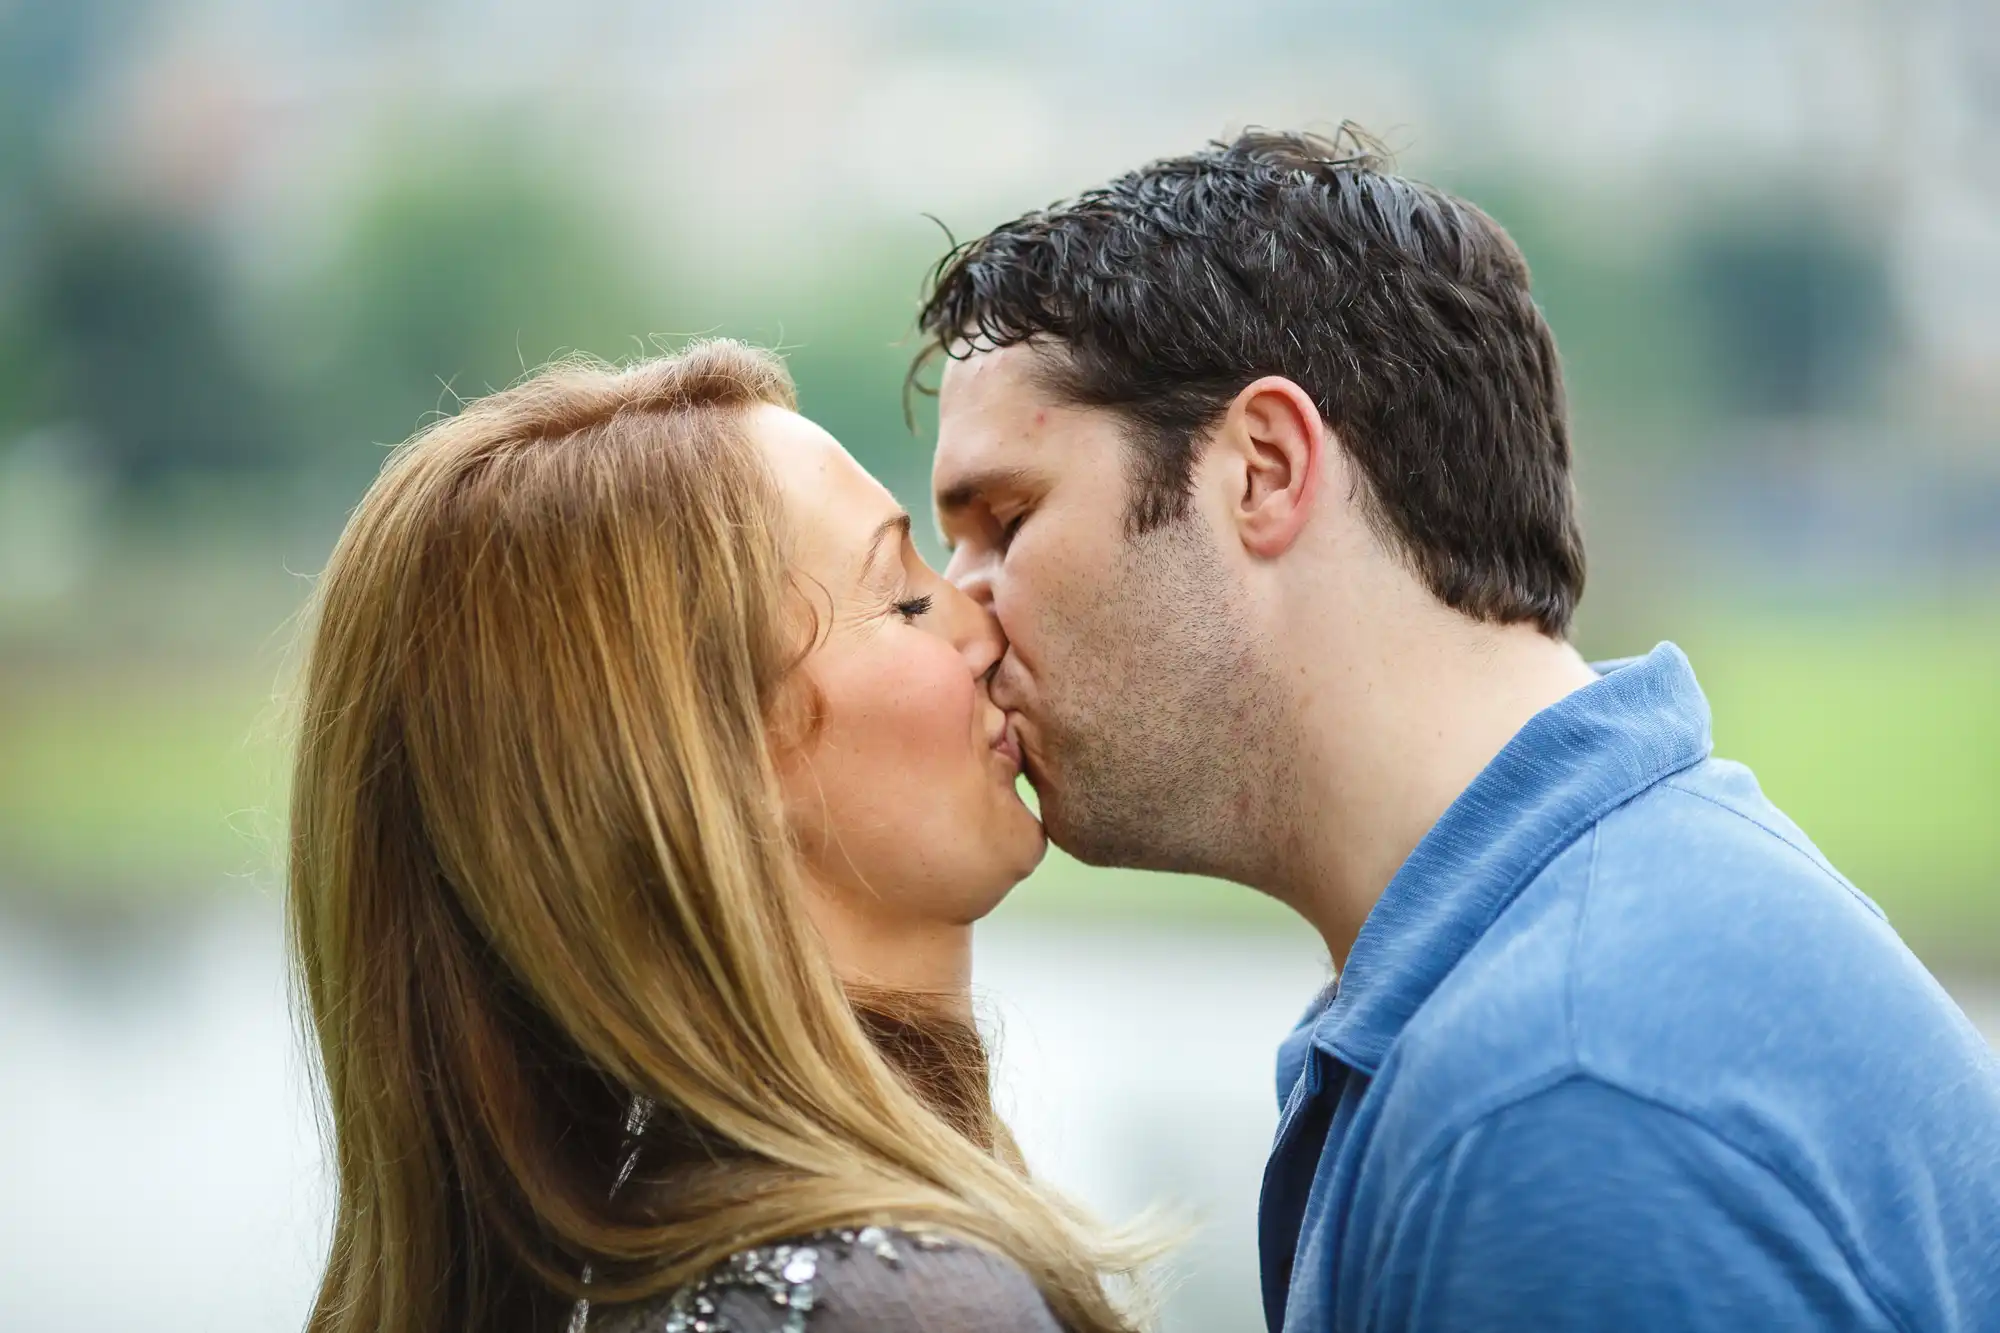 A couple kissing outdoors with a softly blurred background, both wearing casual outfits.